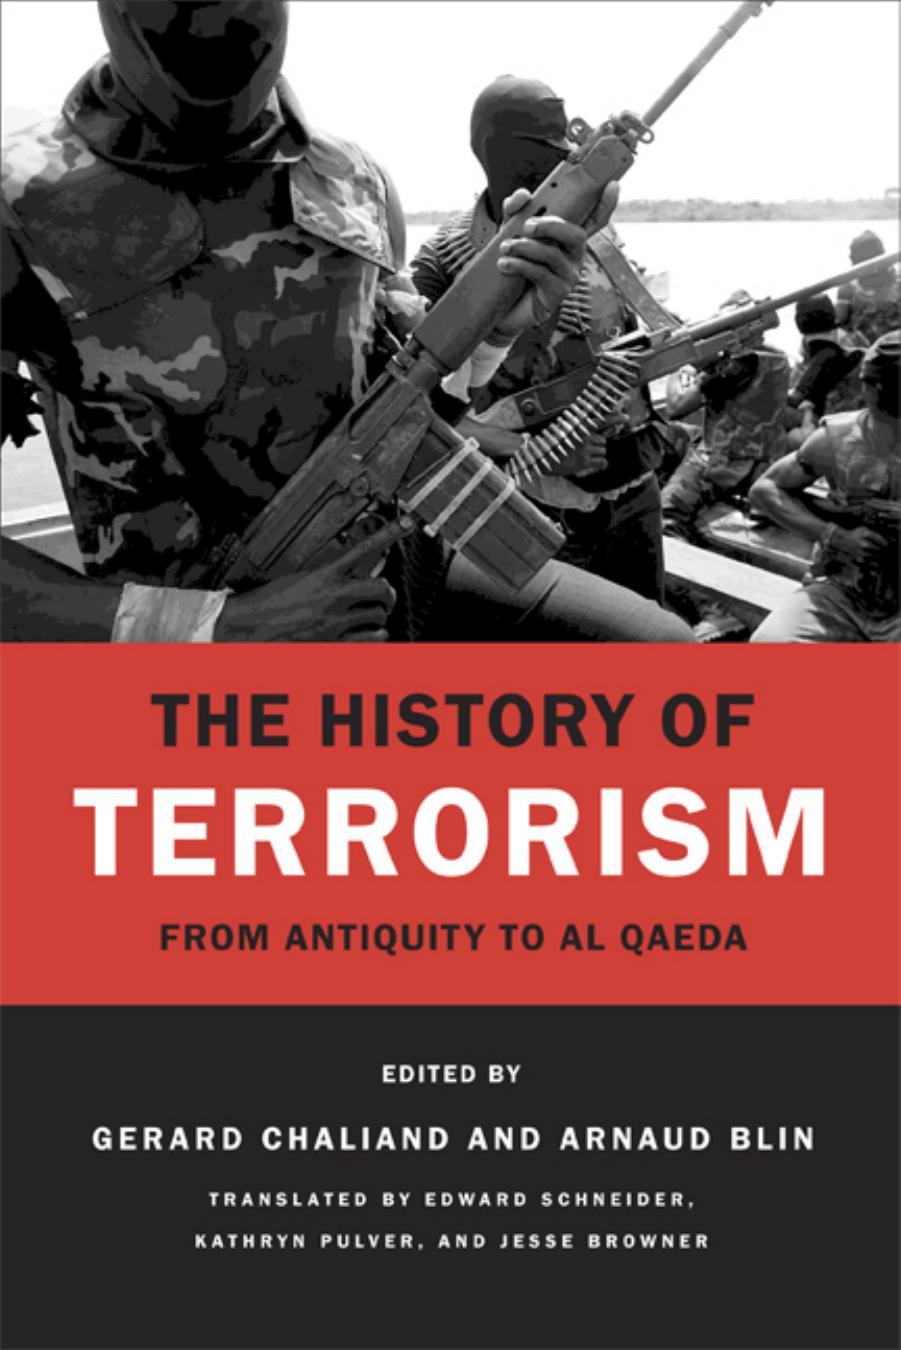 The History of Terrorism: From Antiquity to al Qaeda